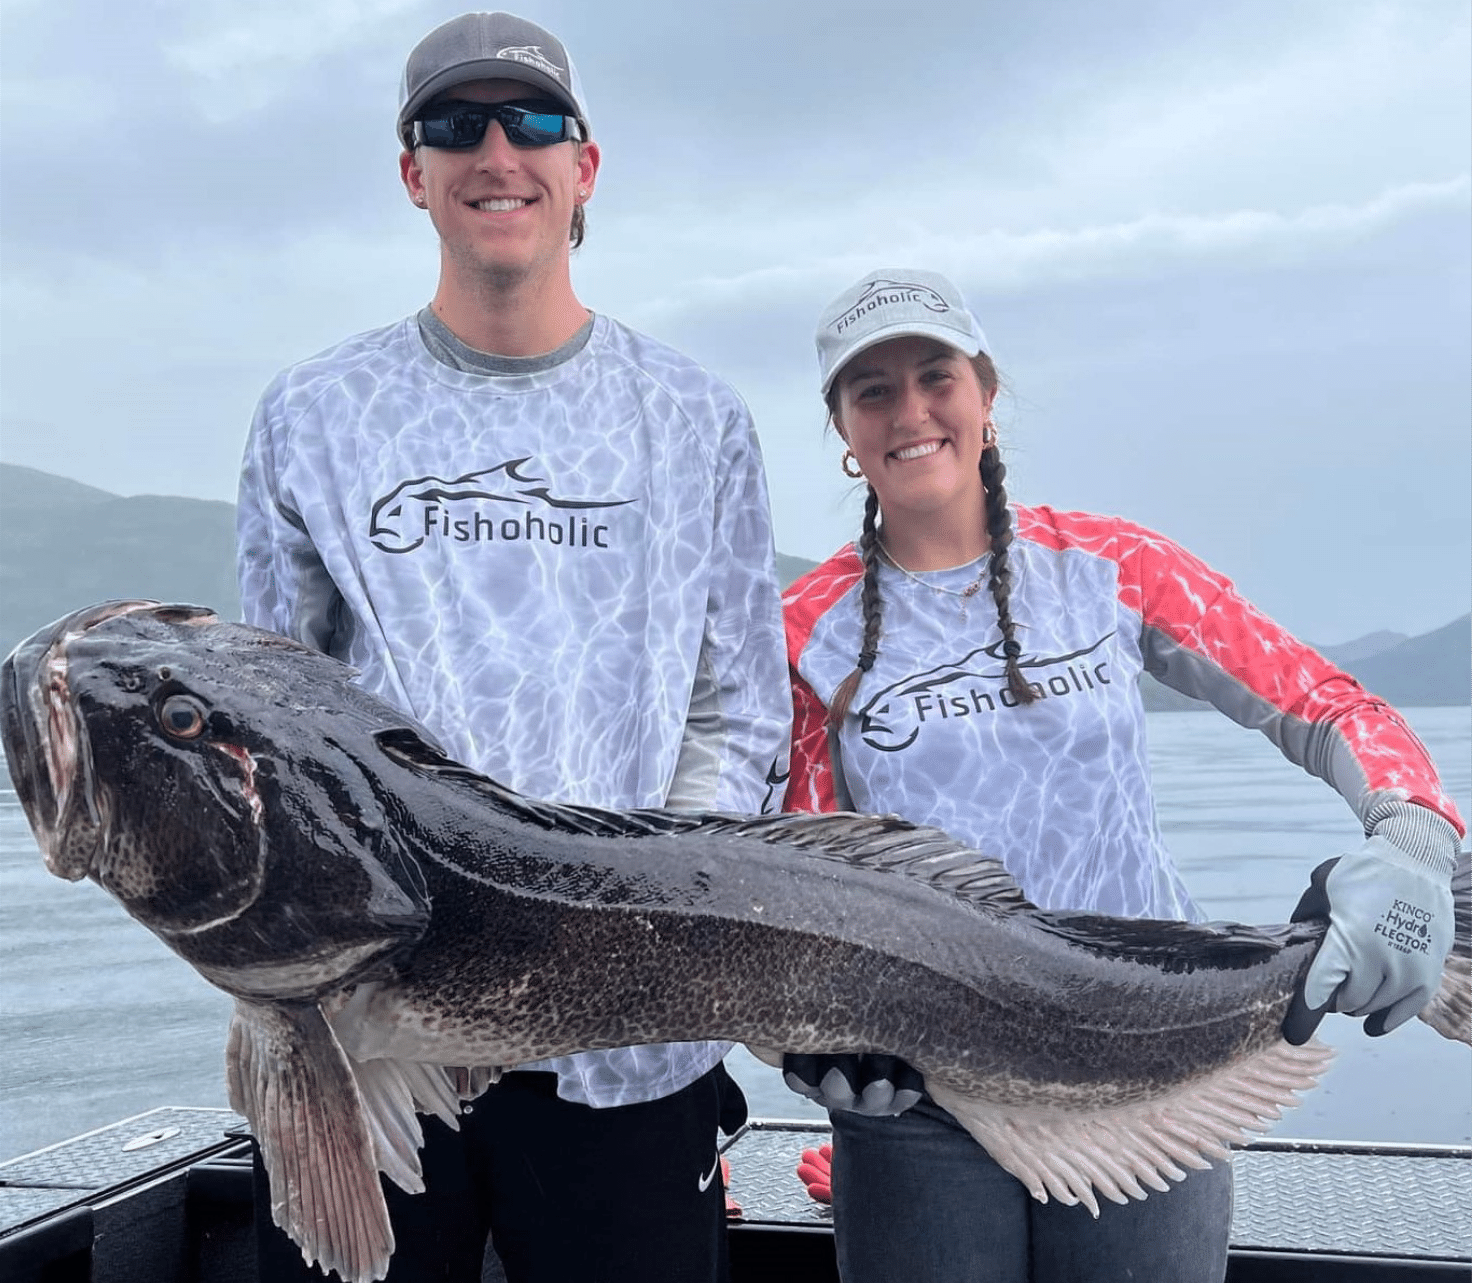 Man and woman holding up large fish wearing Fishoholic fishing shirts on a boat in the water